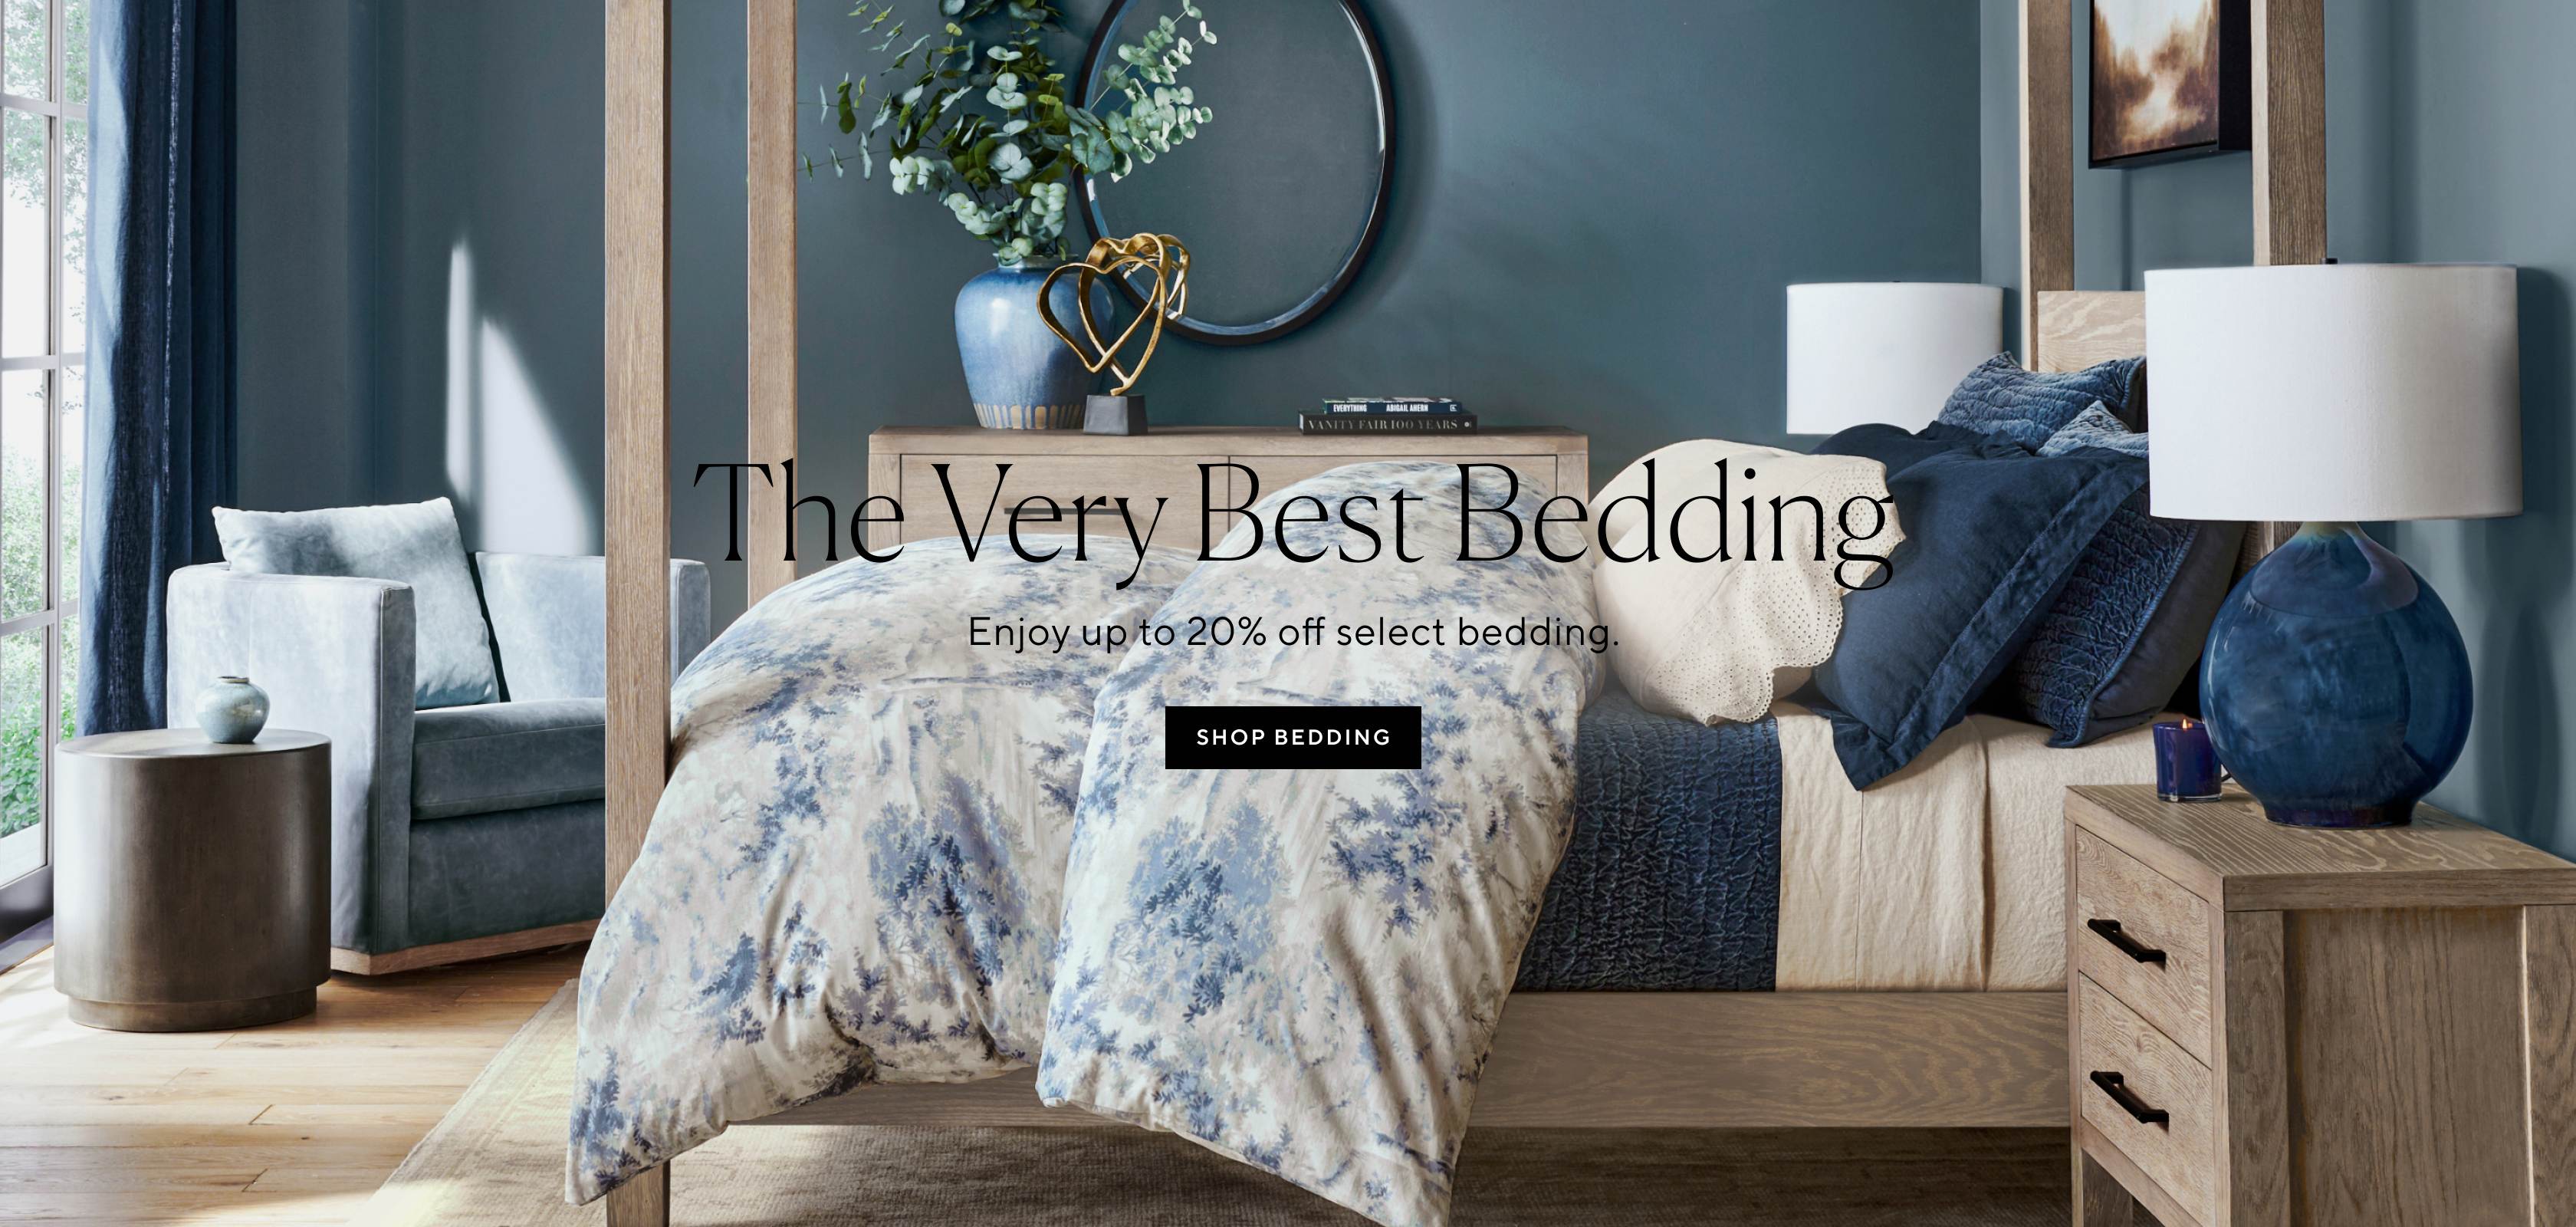 The Very Best Bedding